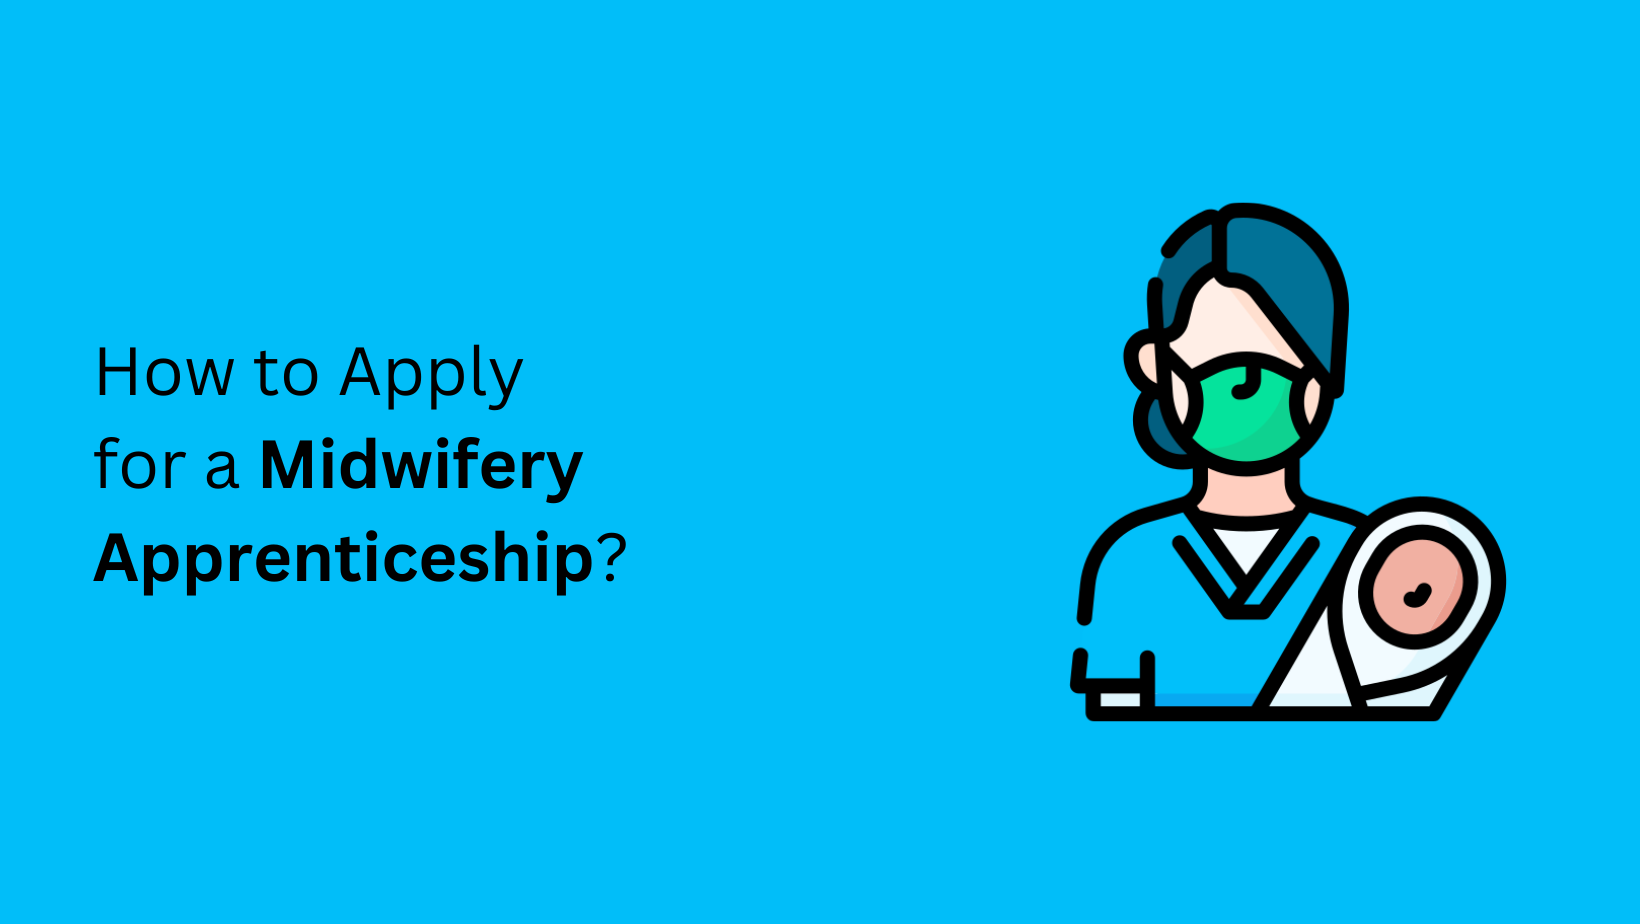 How to Apply for a Midwifery Apprenticeship